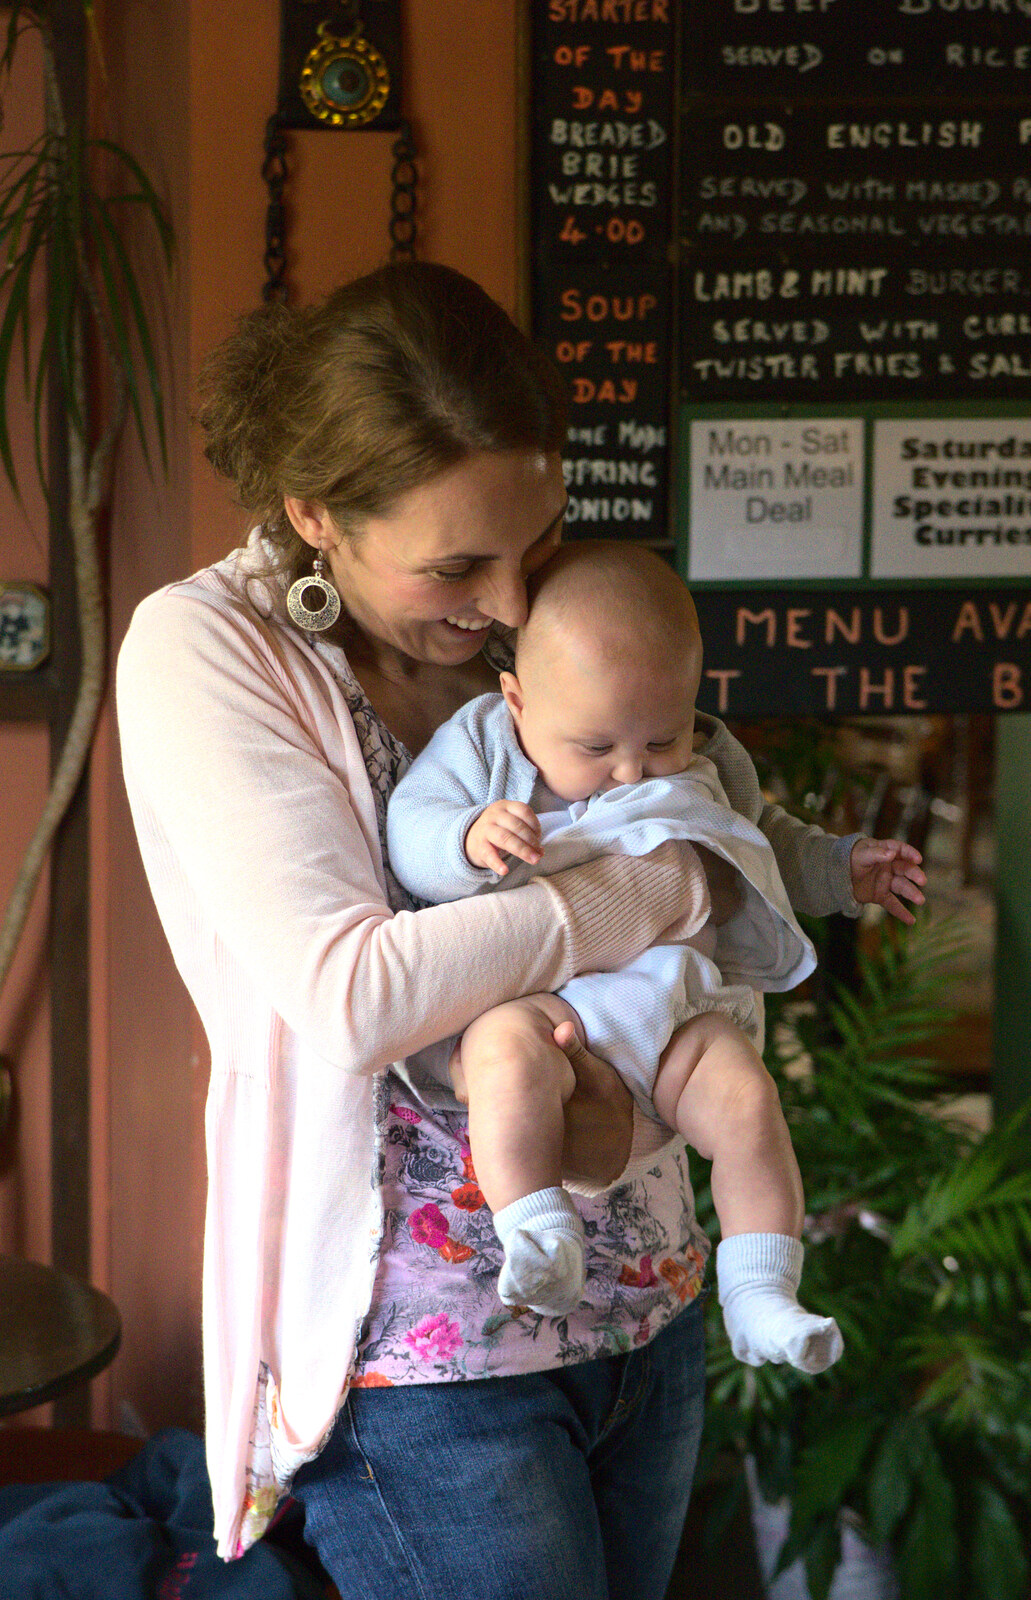 Carmen and baby from Matthew's Birthday up The Swan Inn, Brome, Suffolk - 17th August 2014